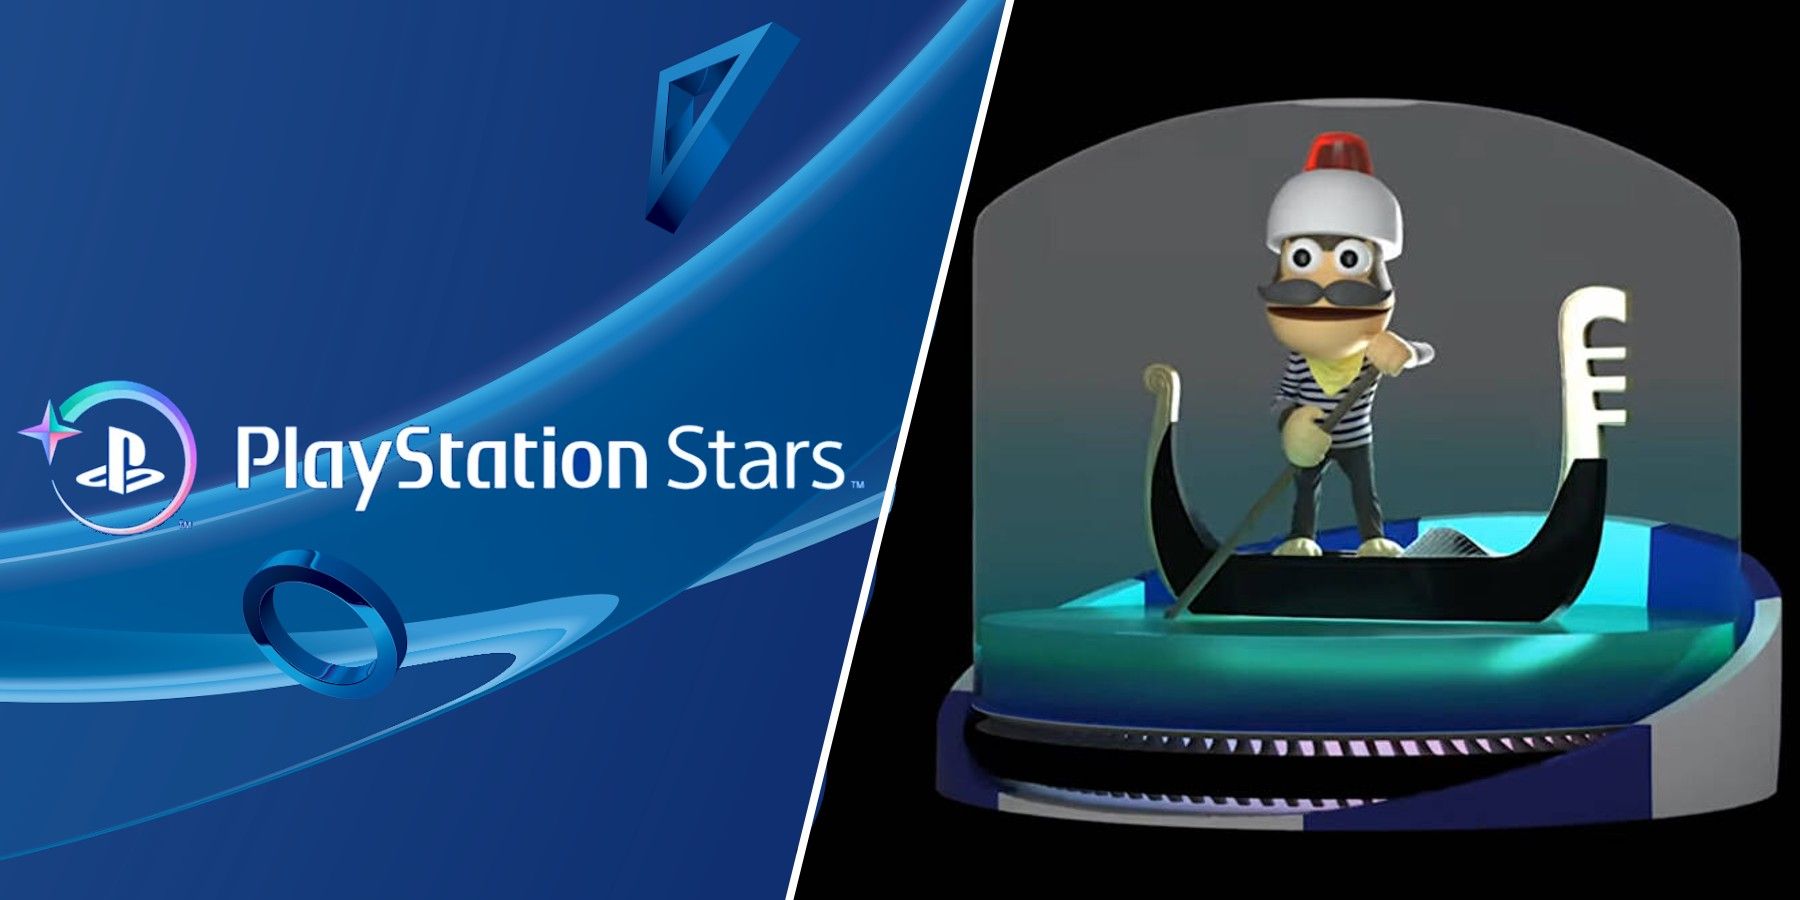 psn - What are the eligibility criteria for hardware-based PlayStation Stars  collectibles? - Arqade